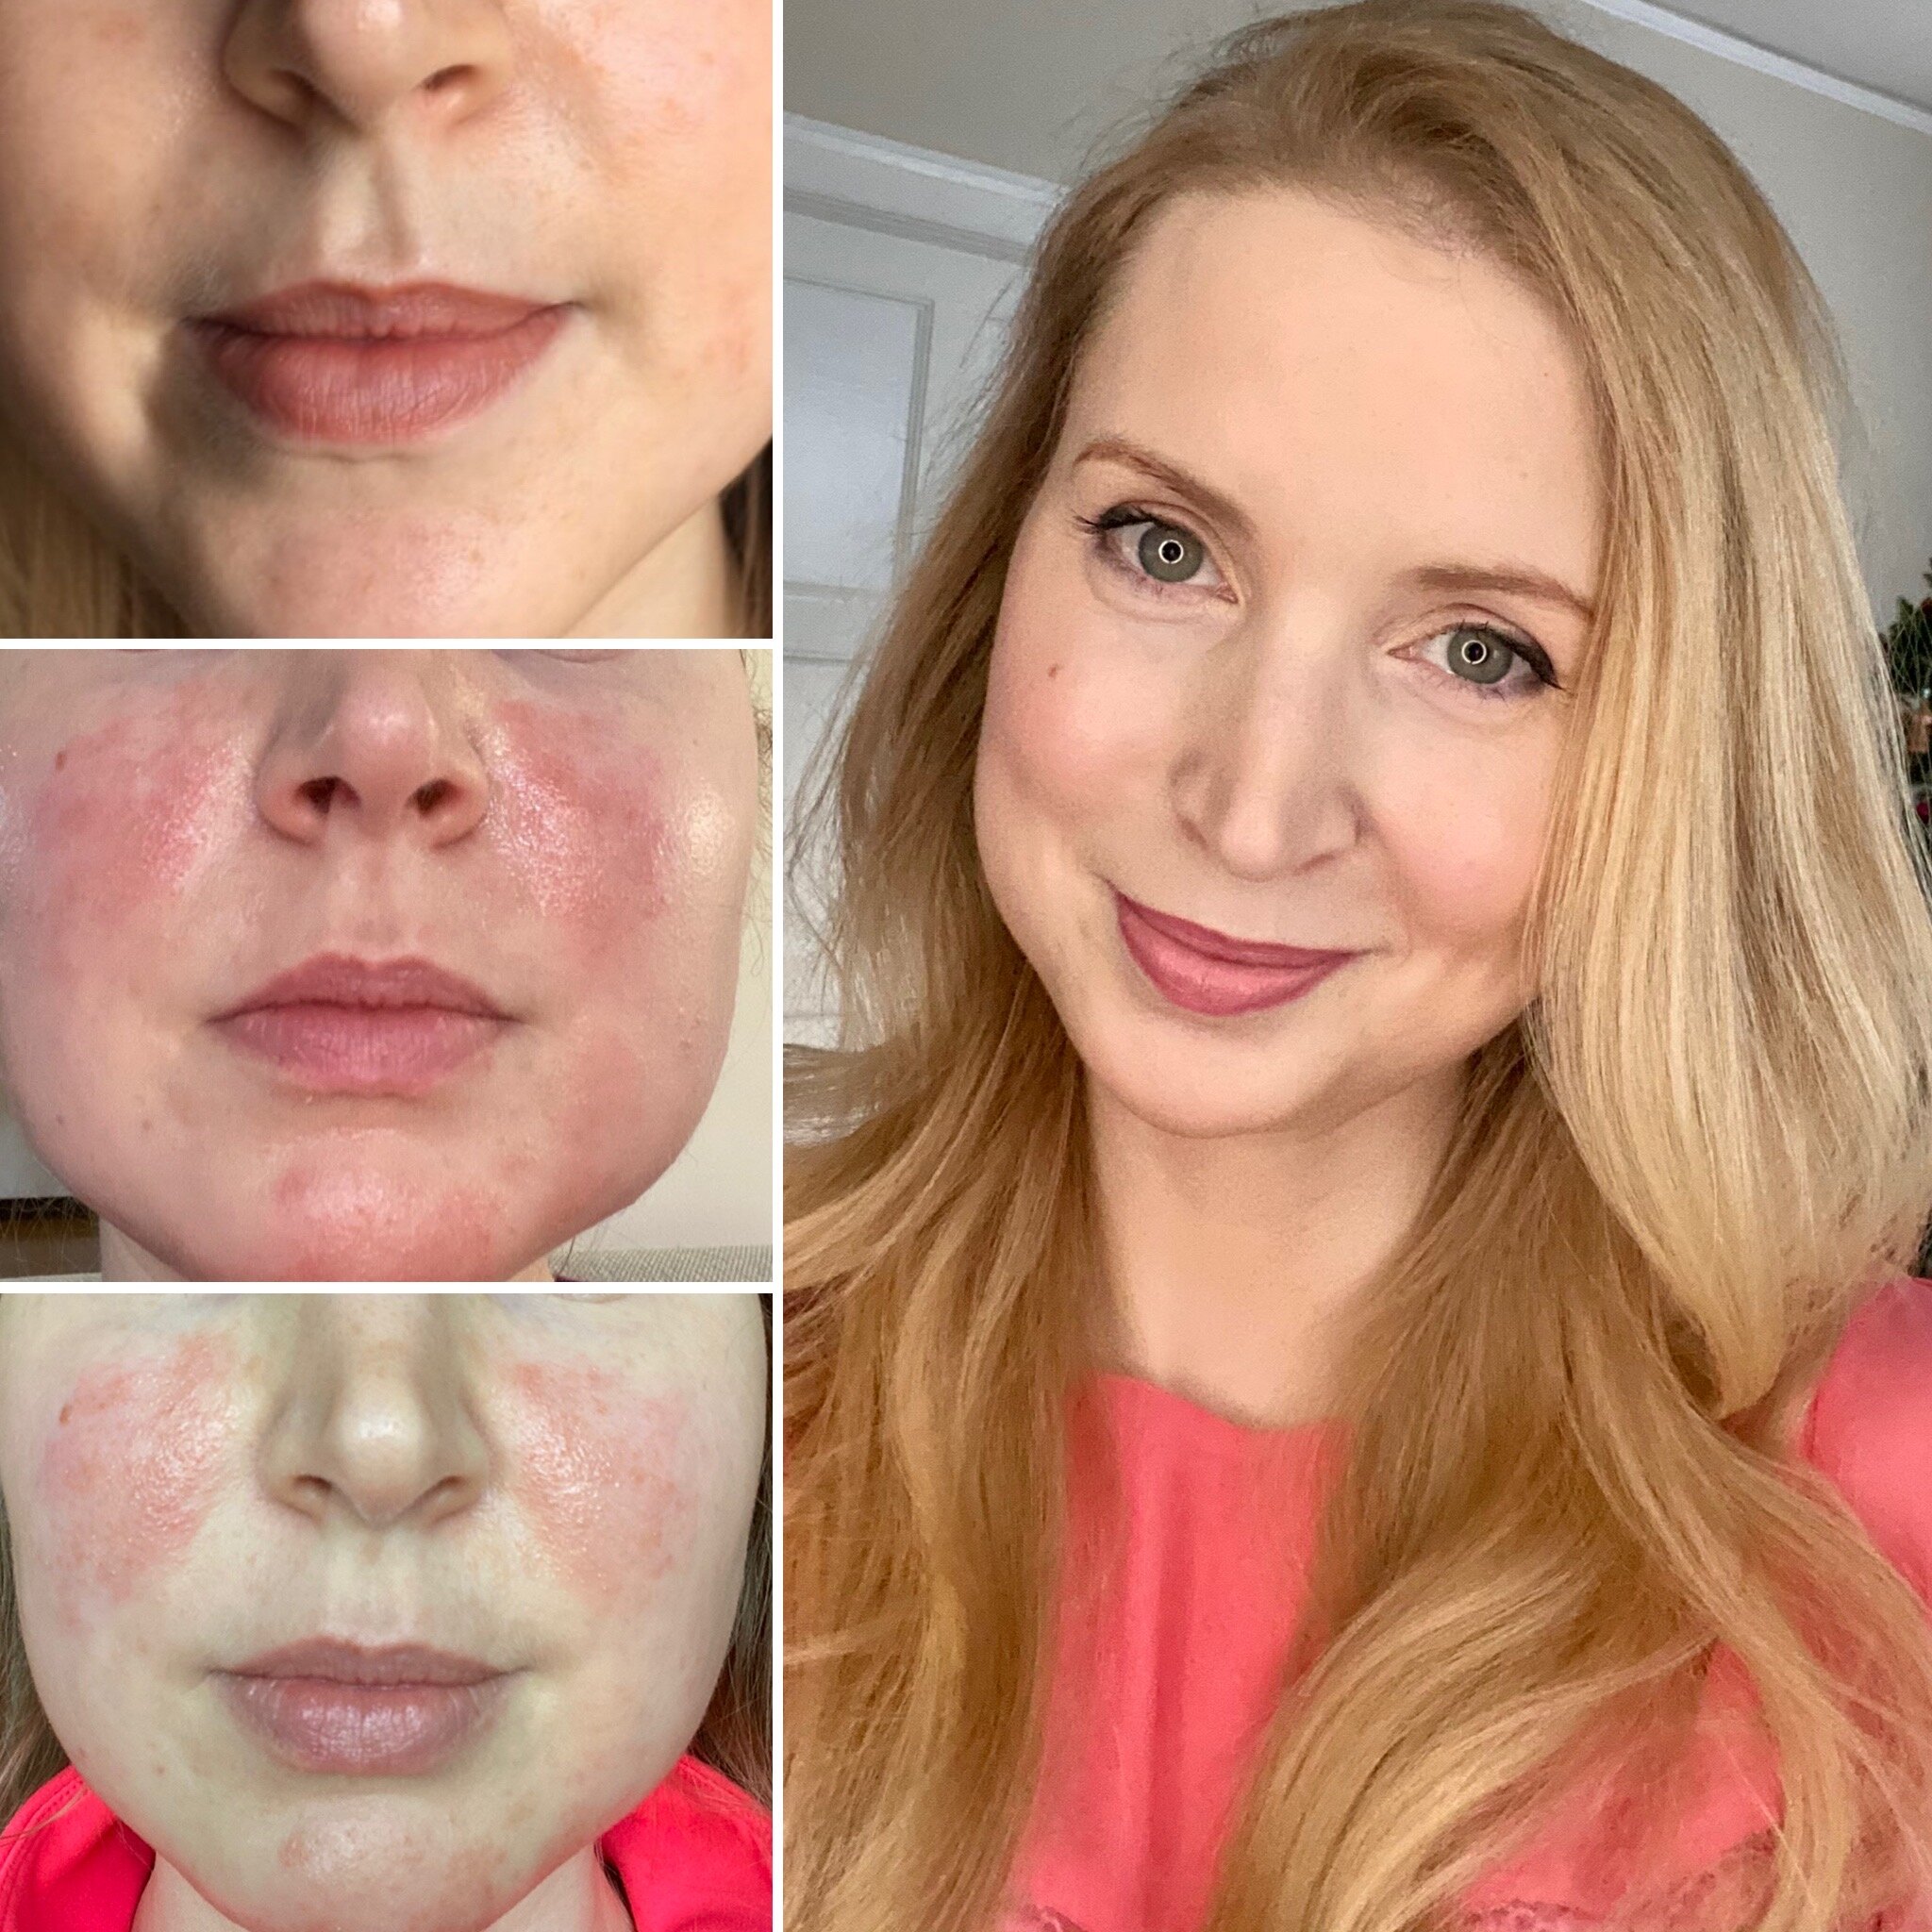 healthHackers - Perioral dermatitis journey: the wonder drink, comeback, the staph infection and the clear up